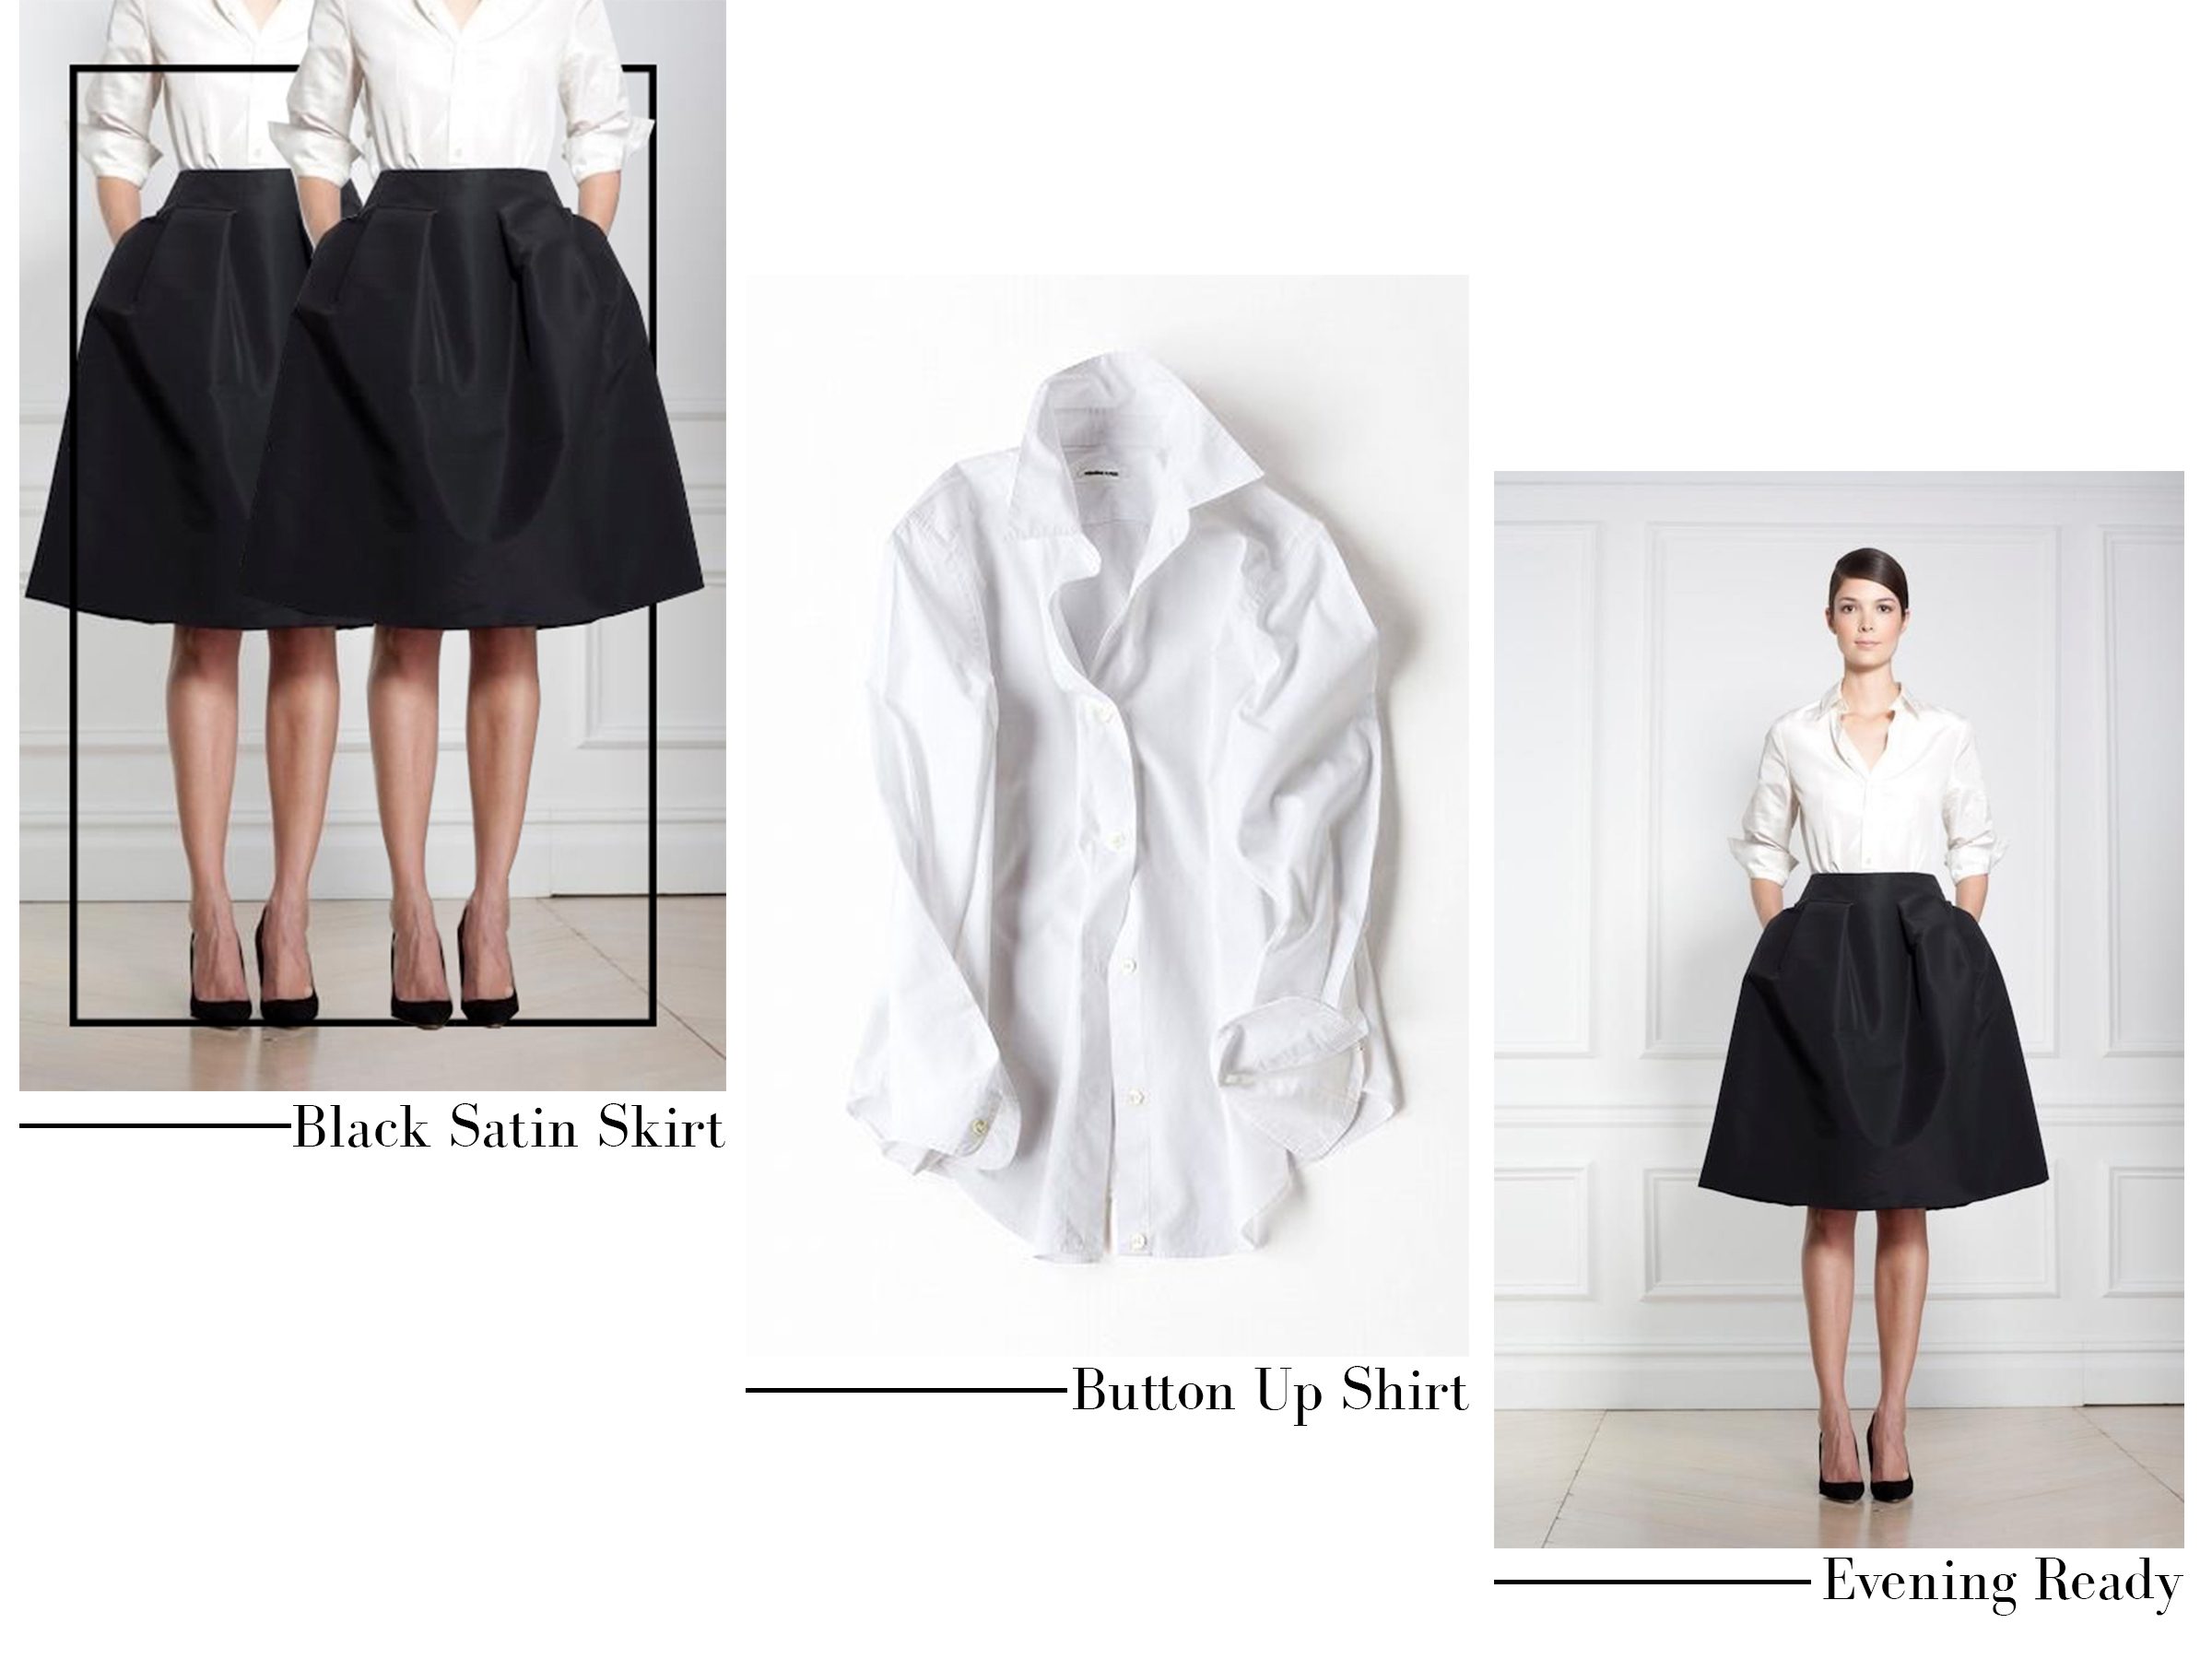 Style Notes: Bringing Back The Skirt